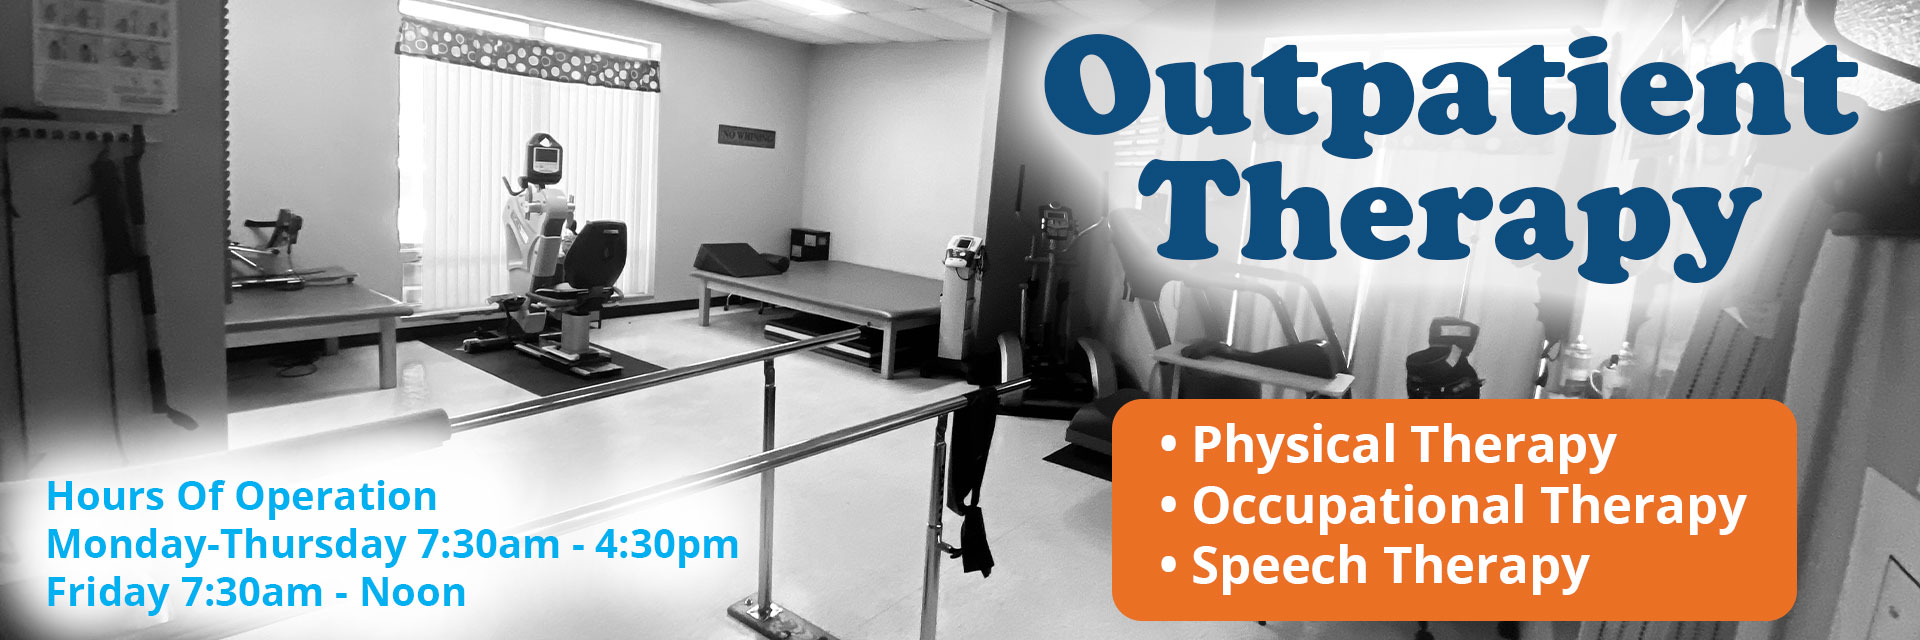 Outpatient Therapy
- Physical Therapy
-Occupational Therapy
-Speech Therapy

Hours of Operation
Monday-Thursday 7:30am-4:30pm